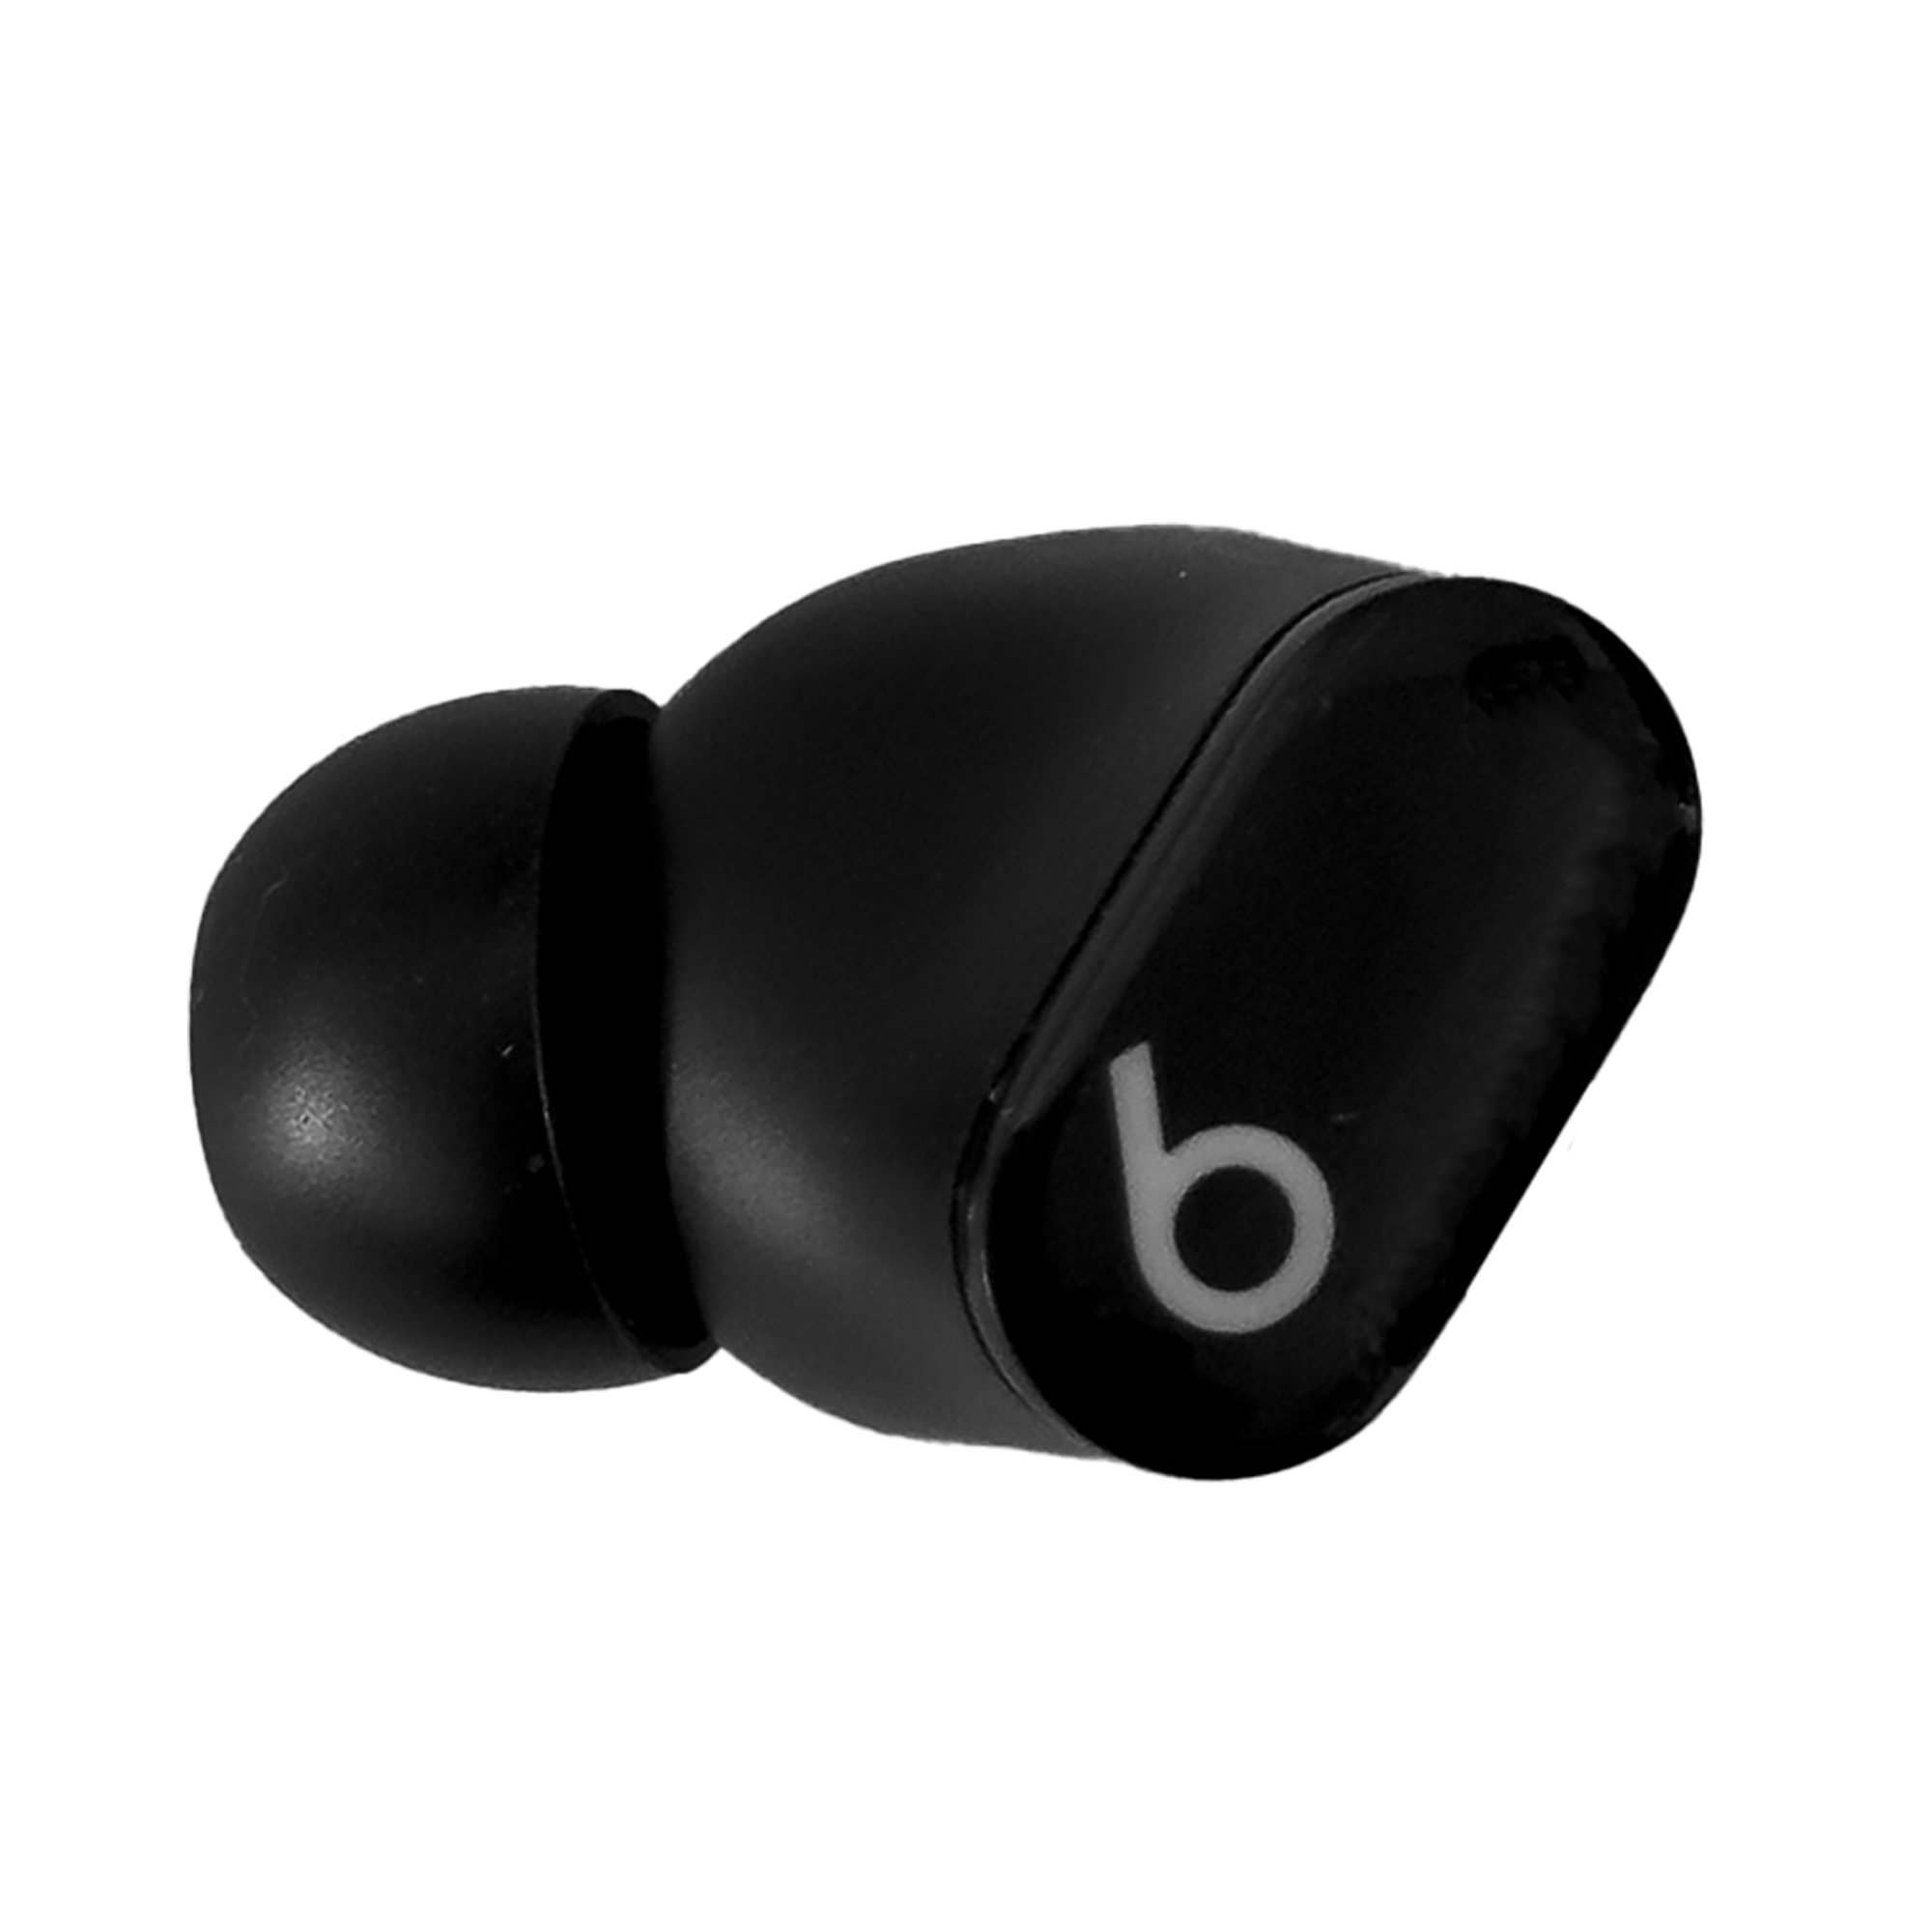 Beats Studio Buds Right, Left, or Charging Case Replacement Part